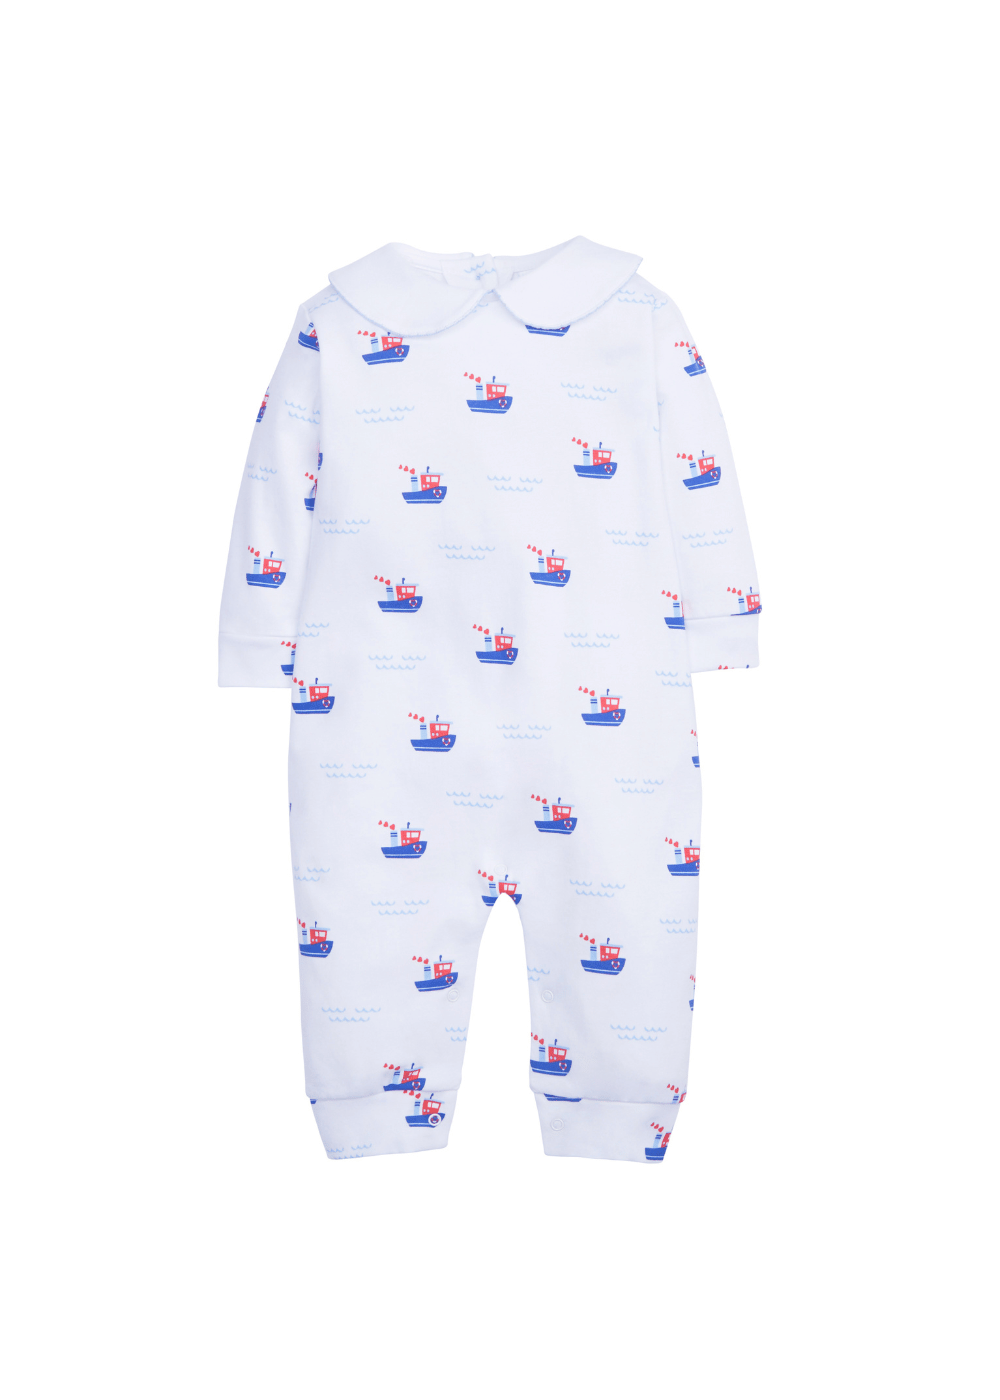 seguridadindustrialcr pima cotton playsuit for baby boys with tugboat hearts design